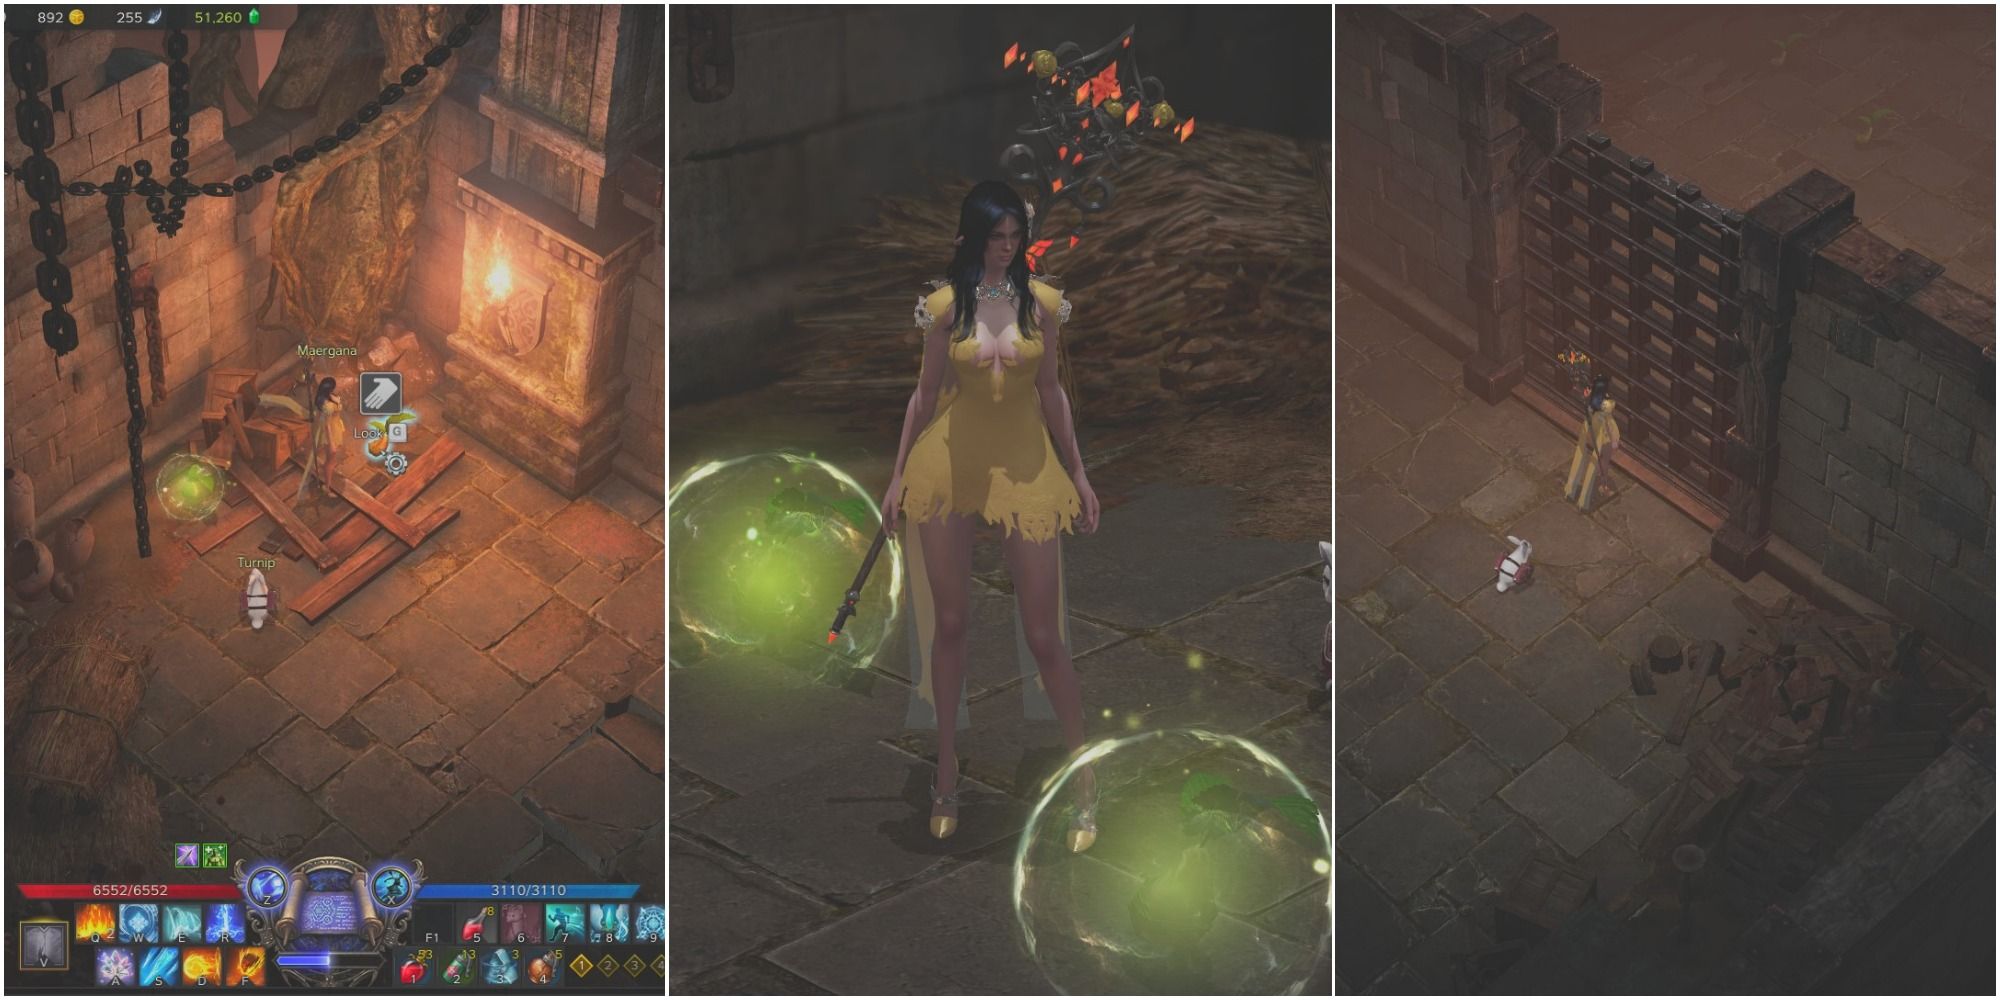 Split image of player find Mokoko Seed 5 in Blackrose Basement jail sell, player standing between two glowing Mokoko Seeds, and players standing in front of closed gates with mokoko seeds on other side